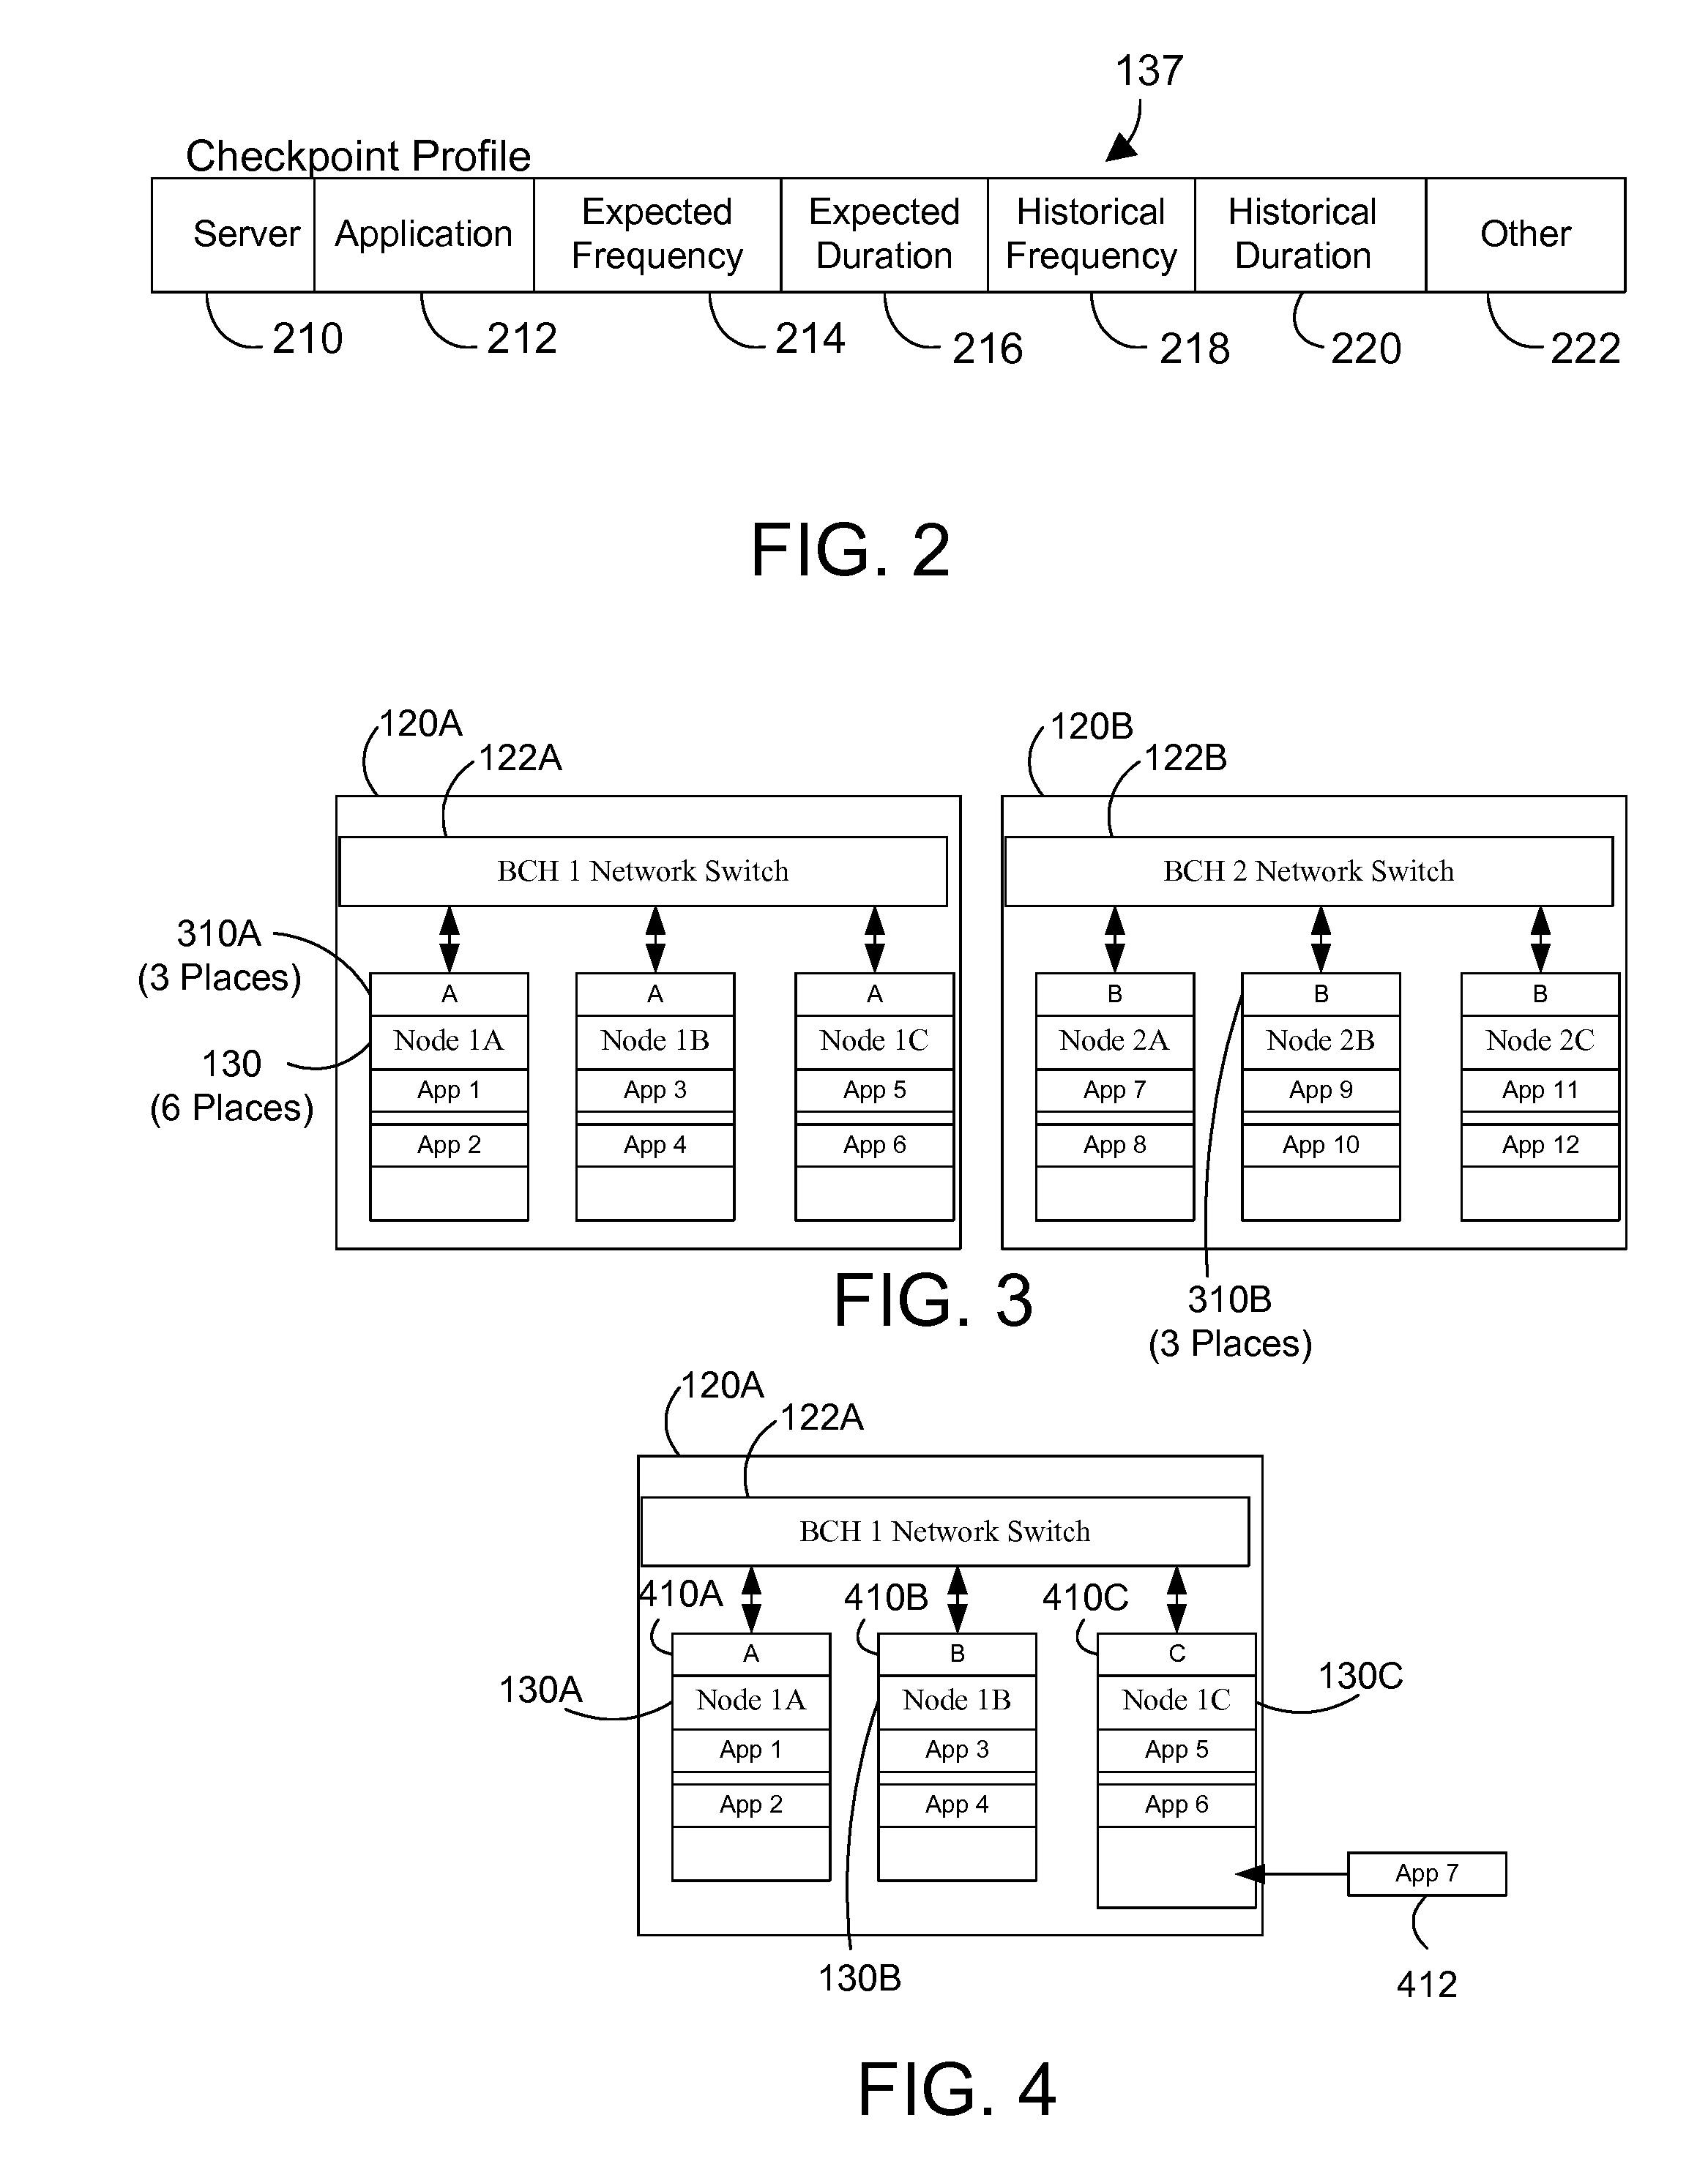 Scheduling Work in a Multi-Node Computer System Based on Checkpoint Characteristics